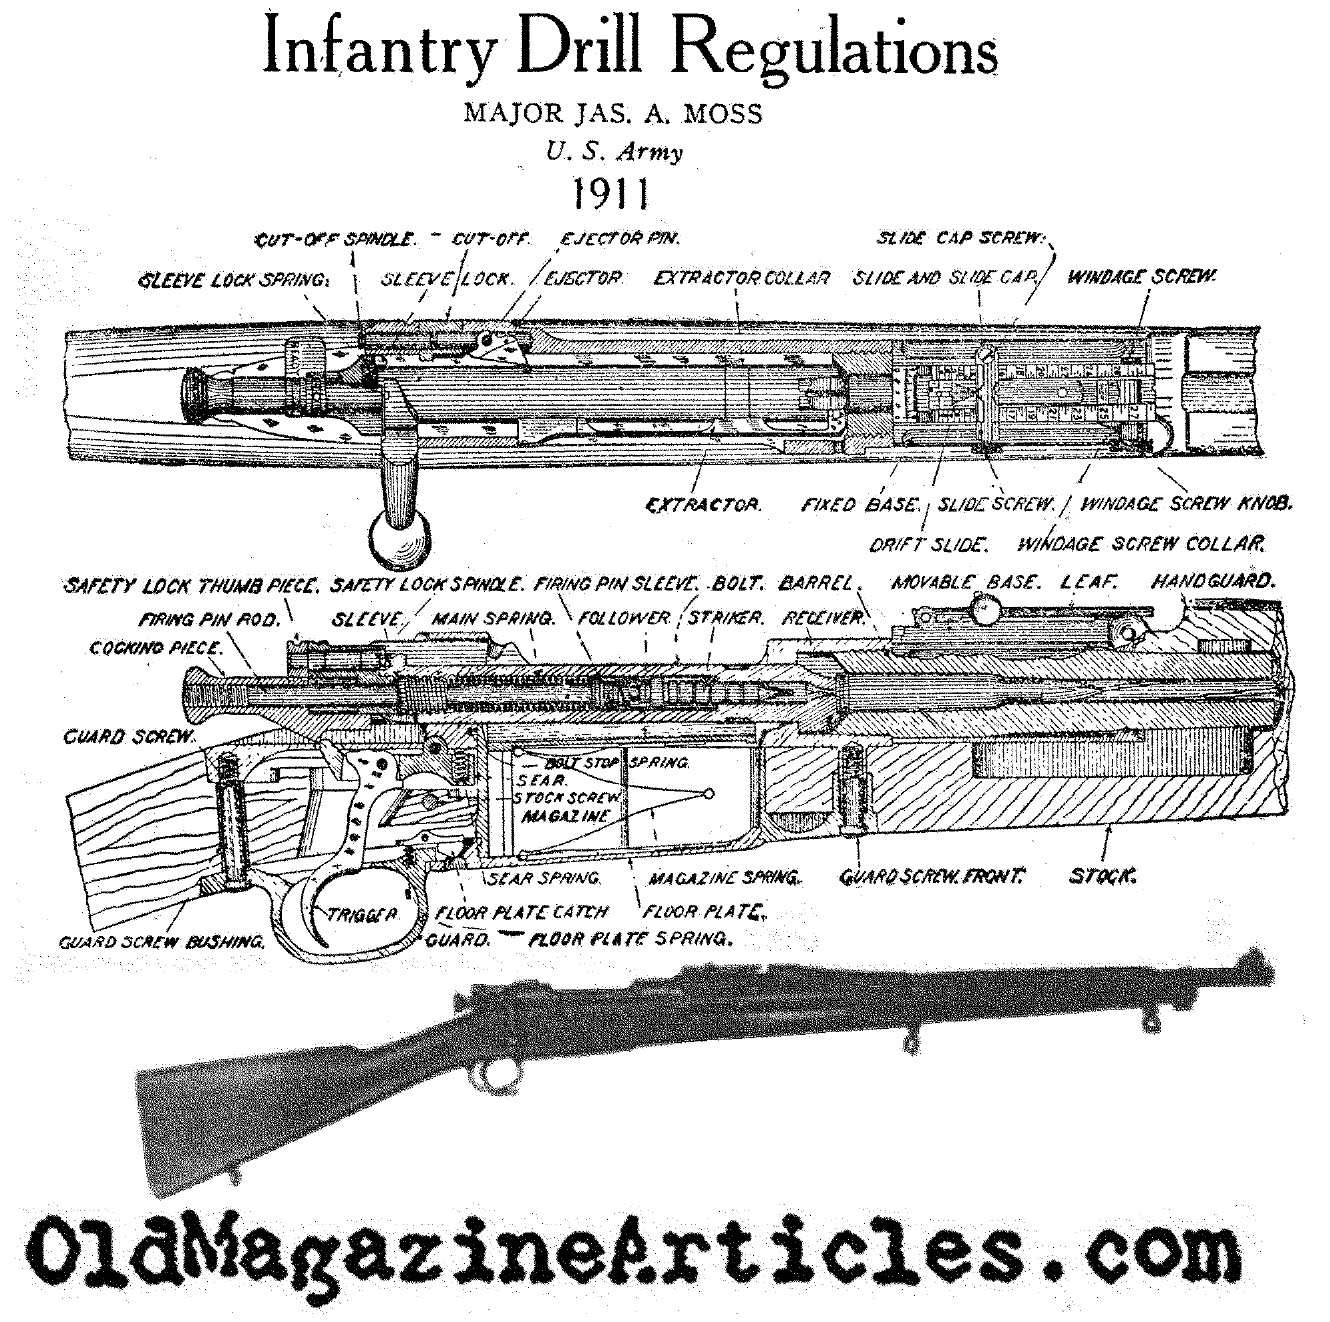 The American Sniper Rifle (U.S. Infantry Drill Manual, 1911)